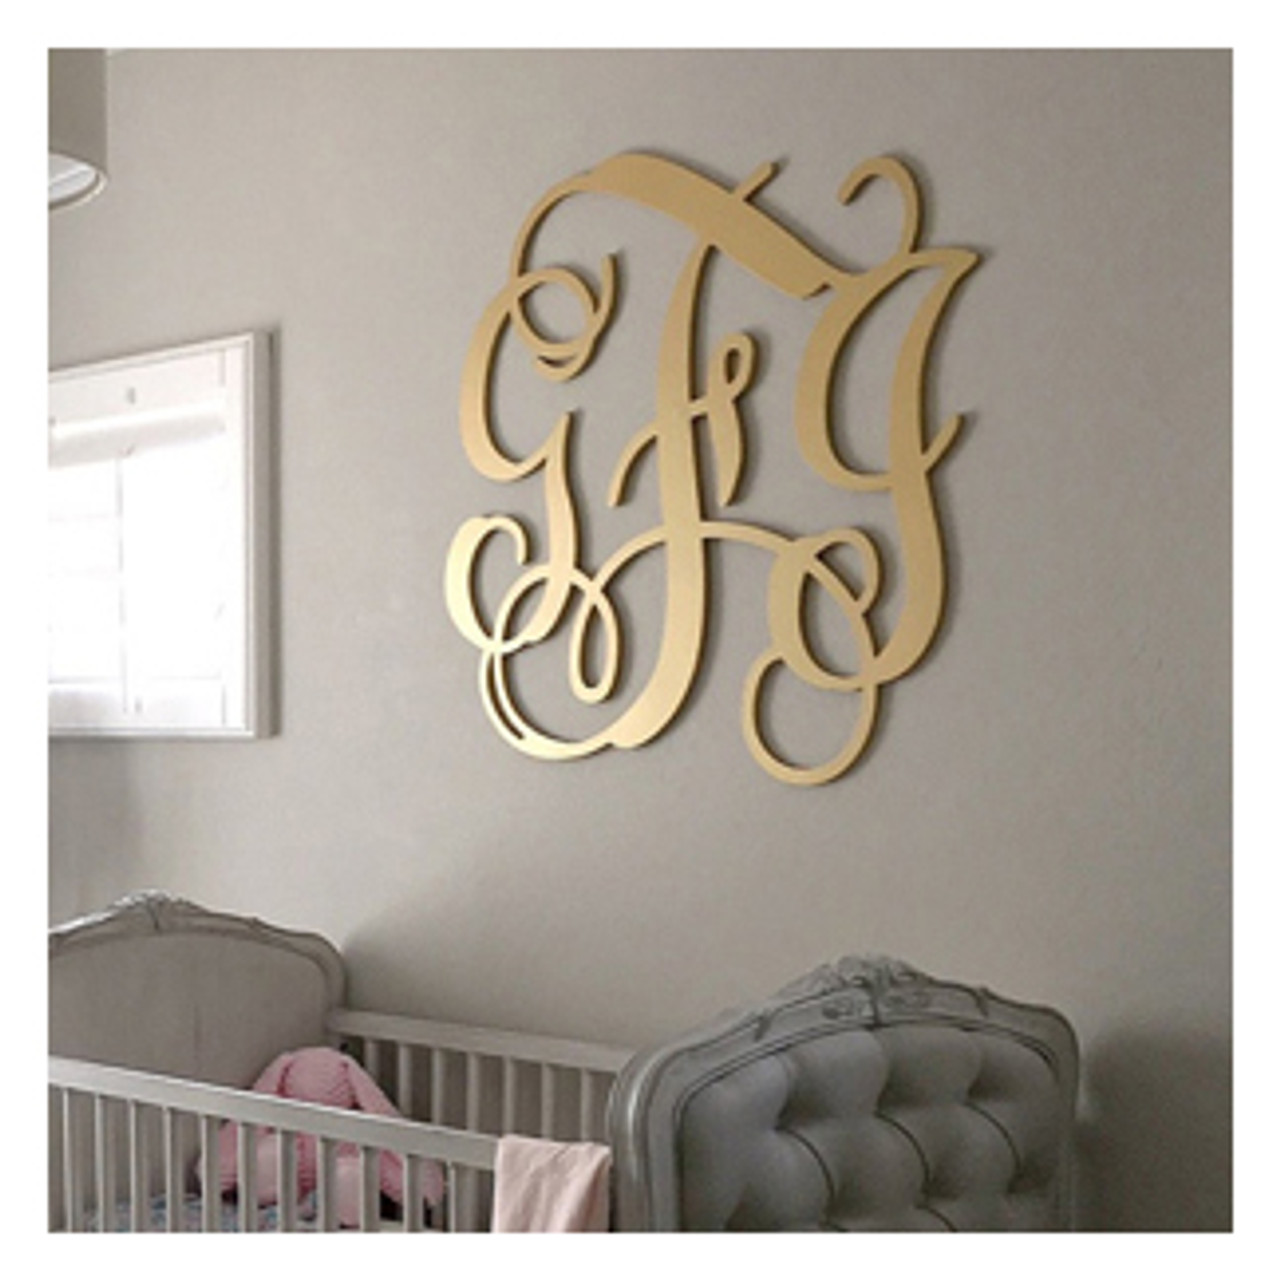 Wall Letters, 24 Monogram Letters Wall Decor, Large Decorative